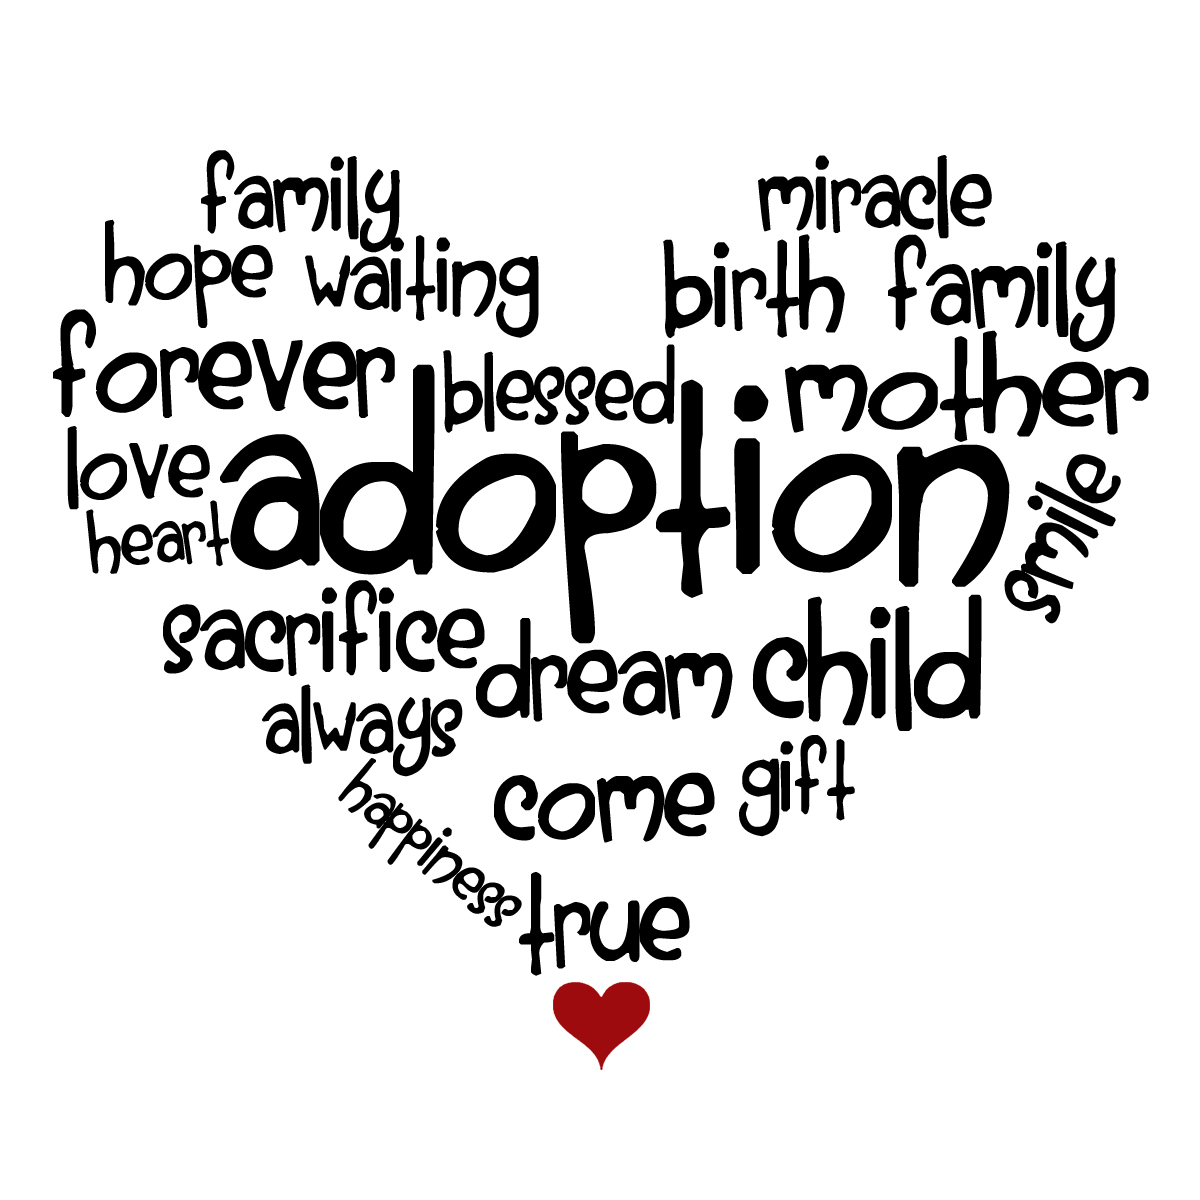 Adoption words 1  577a7cafdceb3